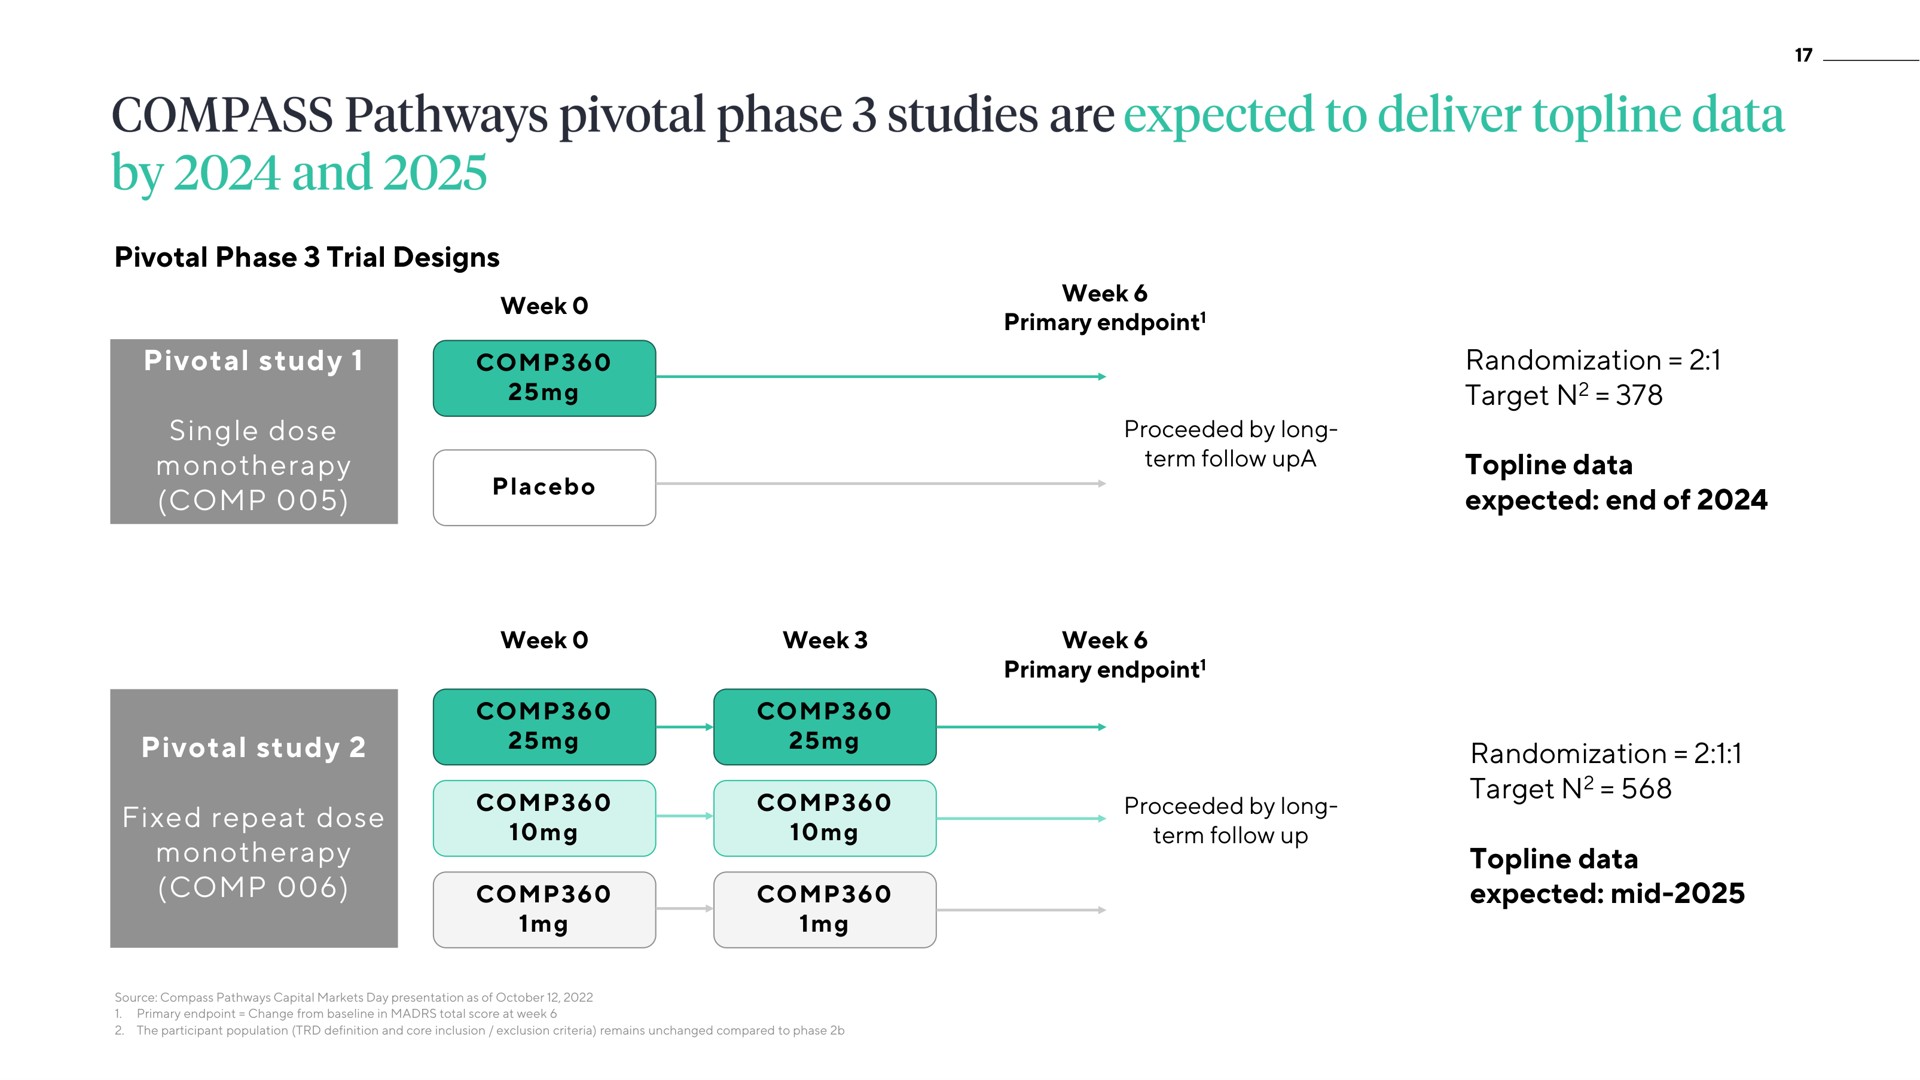 pivotal phase trial designs pivotal study single dose randomization target topline data expected end of pivotal study fixed repeat dose randomization target topline data expected mid compass pathways studies are to deliver by and | ATAI